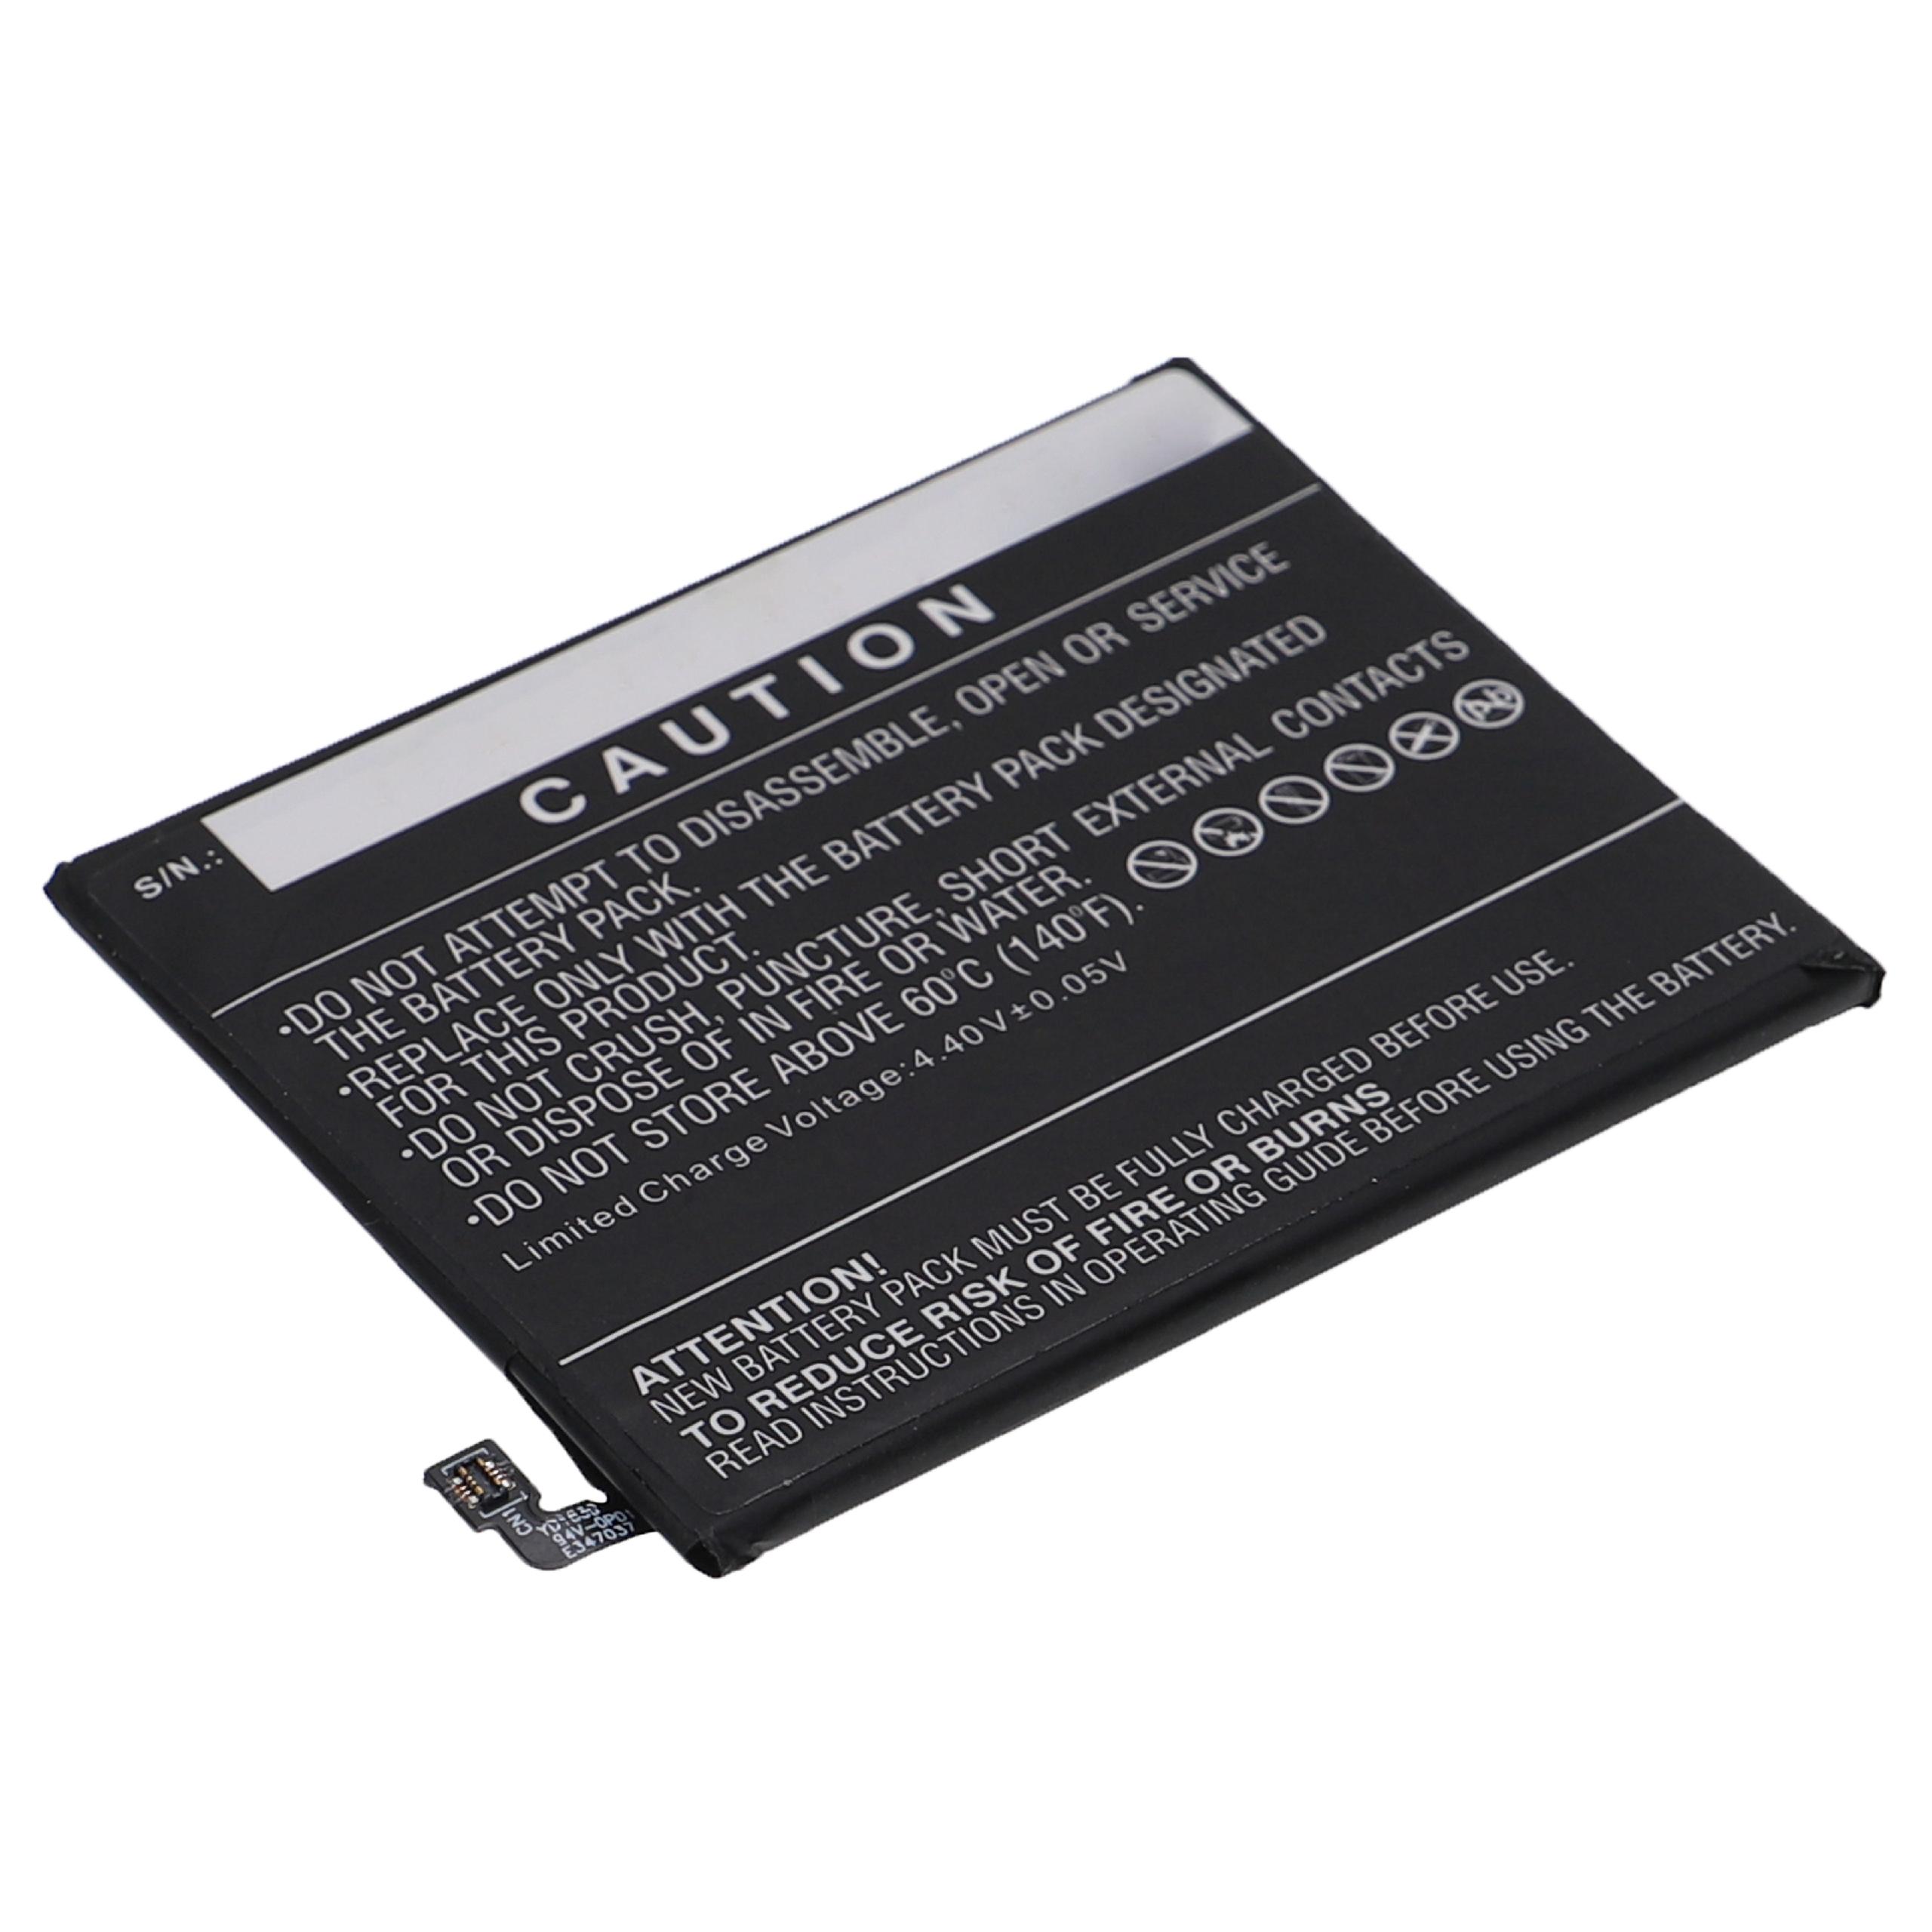 Mobile Phone Battery Replacement for Acer BT61, ATL456579 - 4000mAh 3.85V Li-polymer